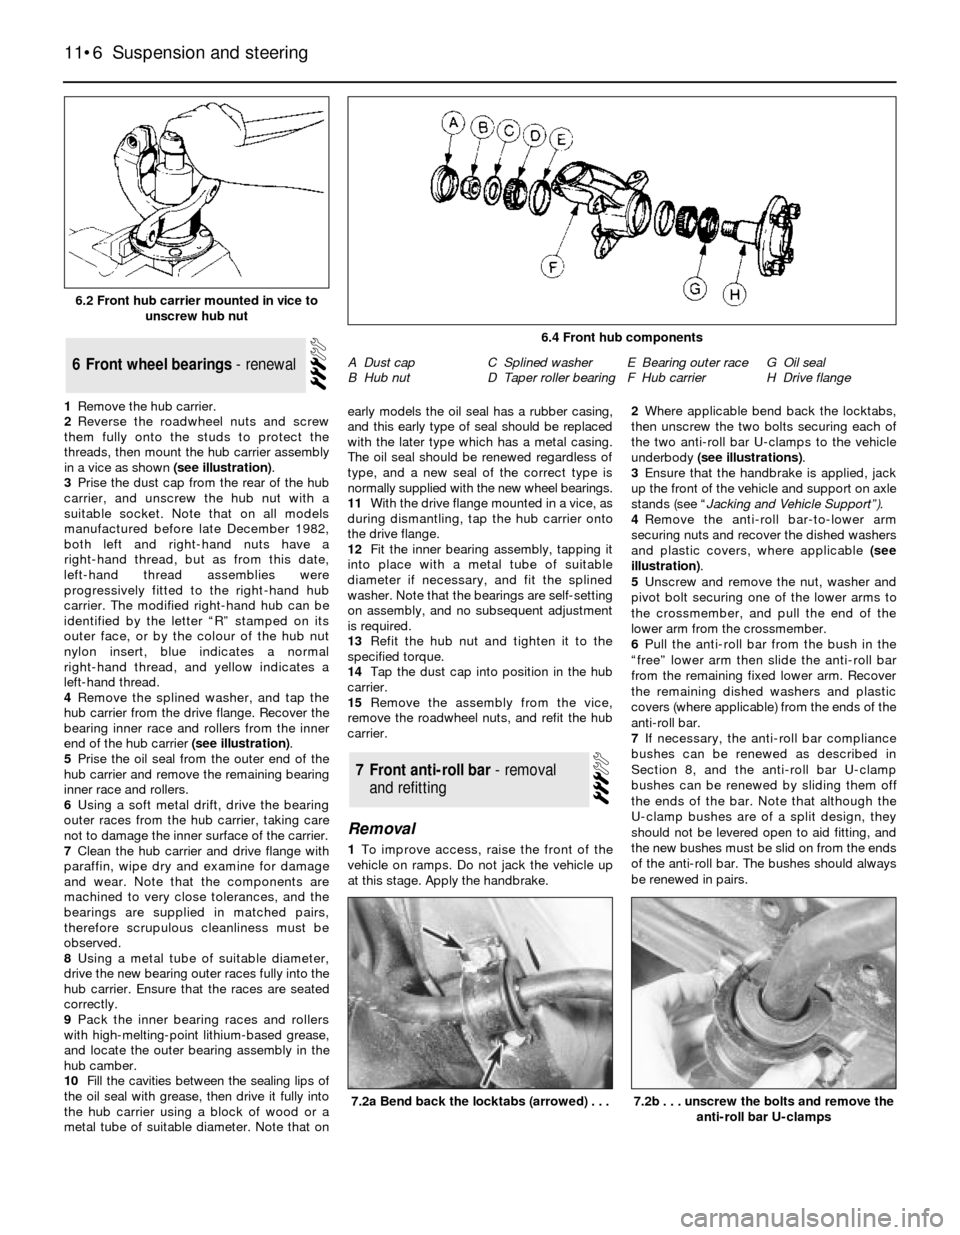 FORD SIERRA 1991 2.G Suspension And Steering Workshop Manual 1Remove the hub carrier.
2Reverse the roadwheel nuts and screw
them fully onto the studs to protect the
threads, then mount the hub carrier assembly
in a vice as shown (see illustration).
3Prise the d